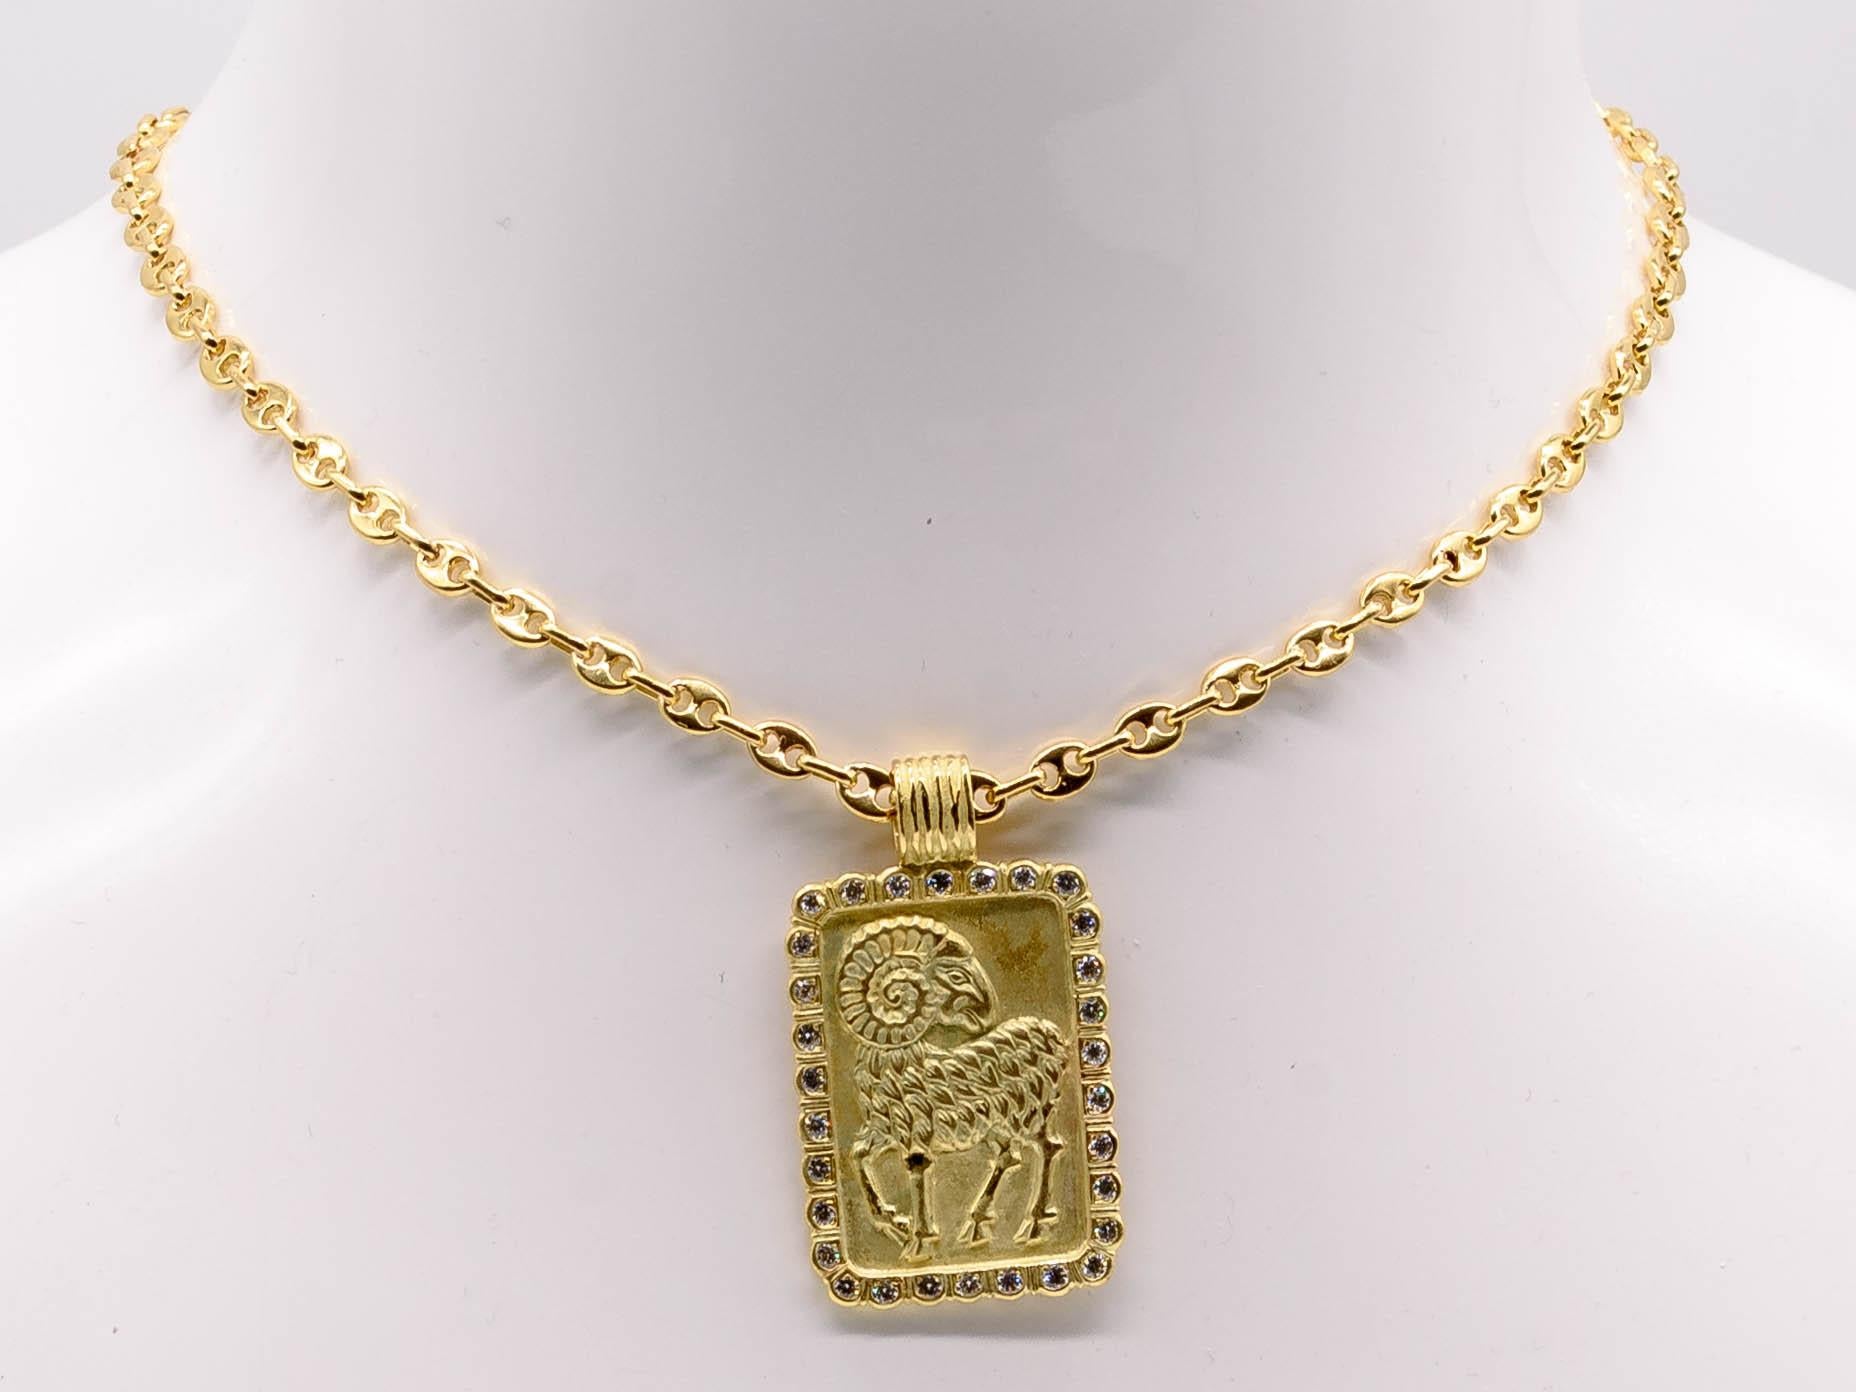 A beautifully crafted rectangular pendant depicting the astrological symbol for Aries the ram,  his horns beautifully spiraling across the top of the jewel.  The rectangle is framed with small round diamonds totaling close to 1 ct,  and the